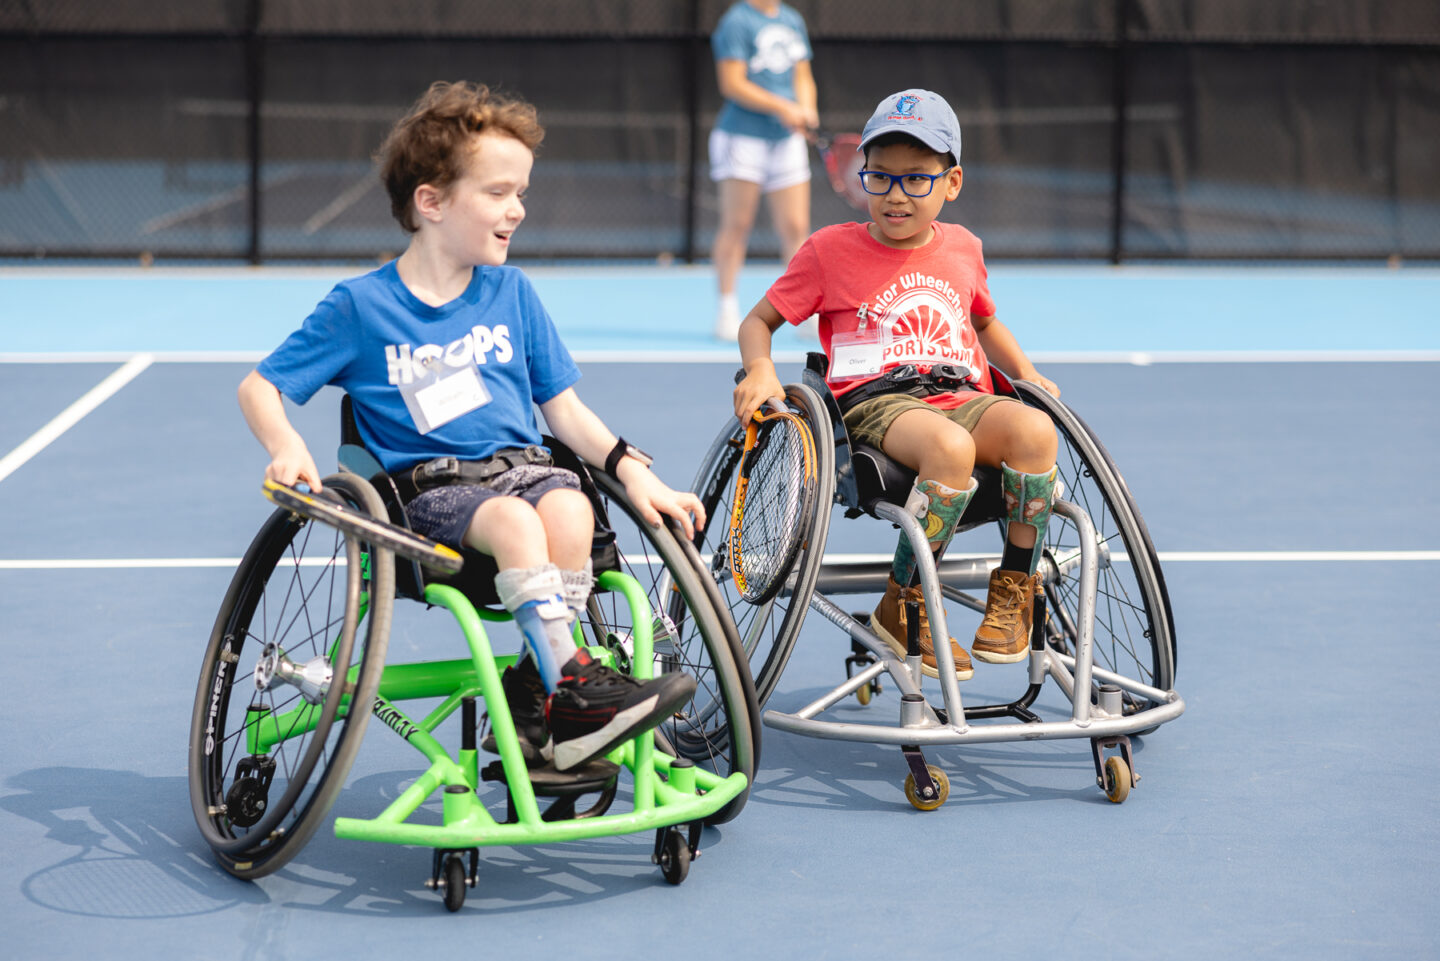 Two boys in wheelchairs playing tennis on a blue court.